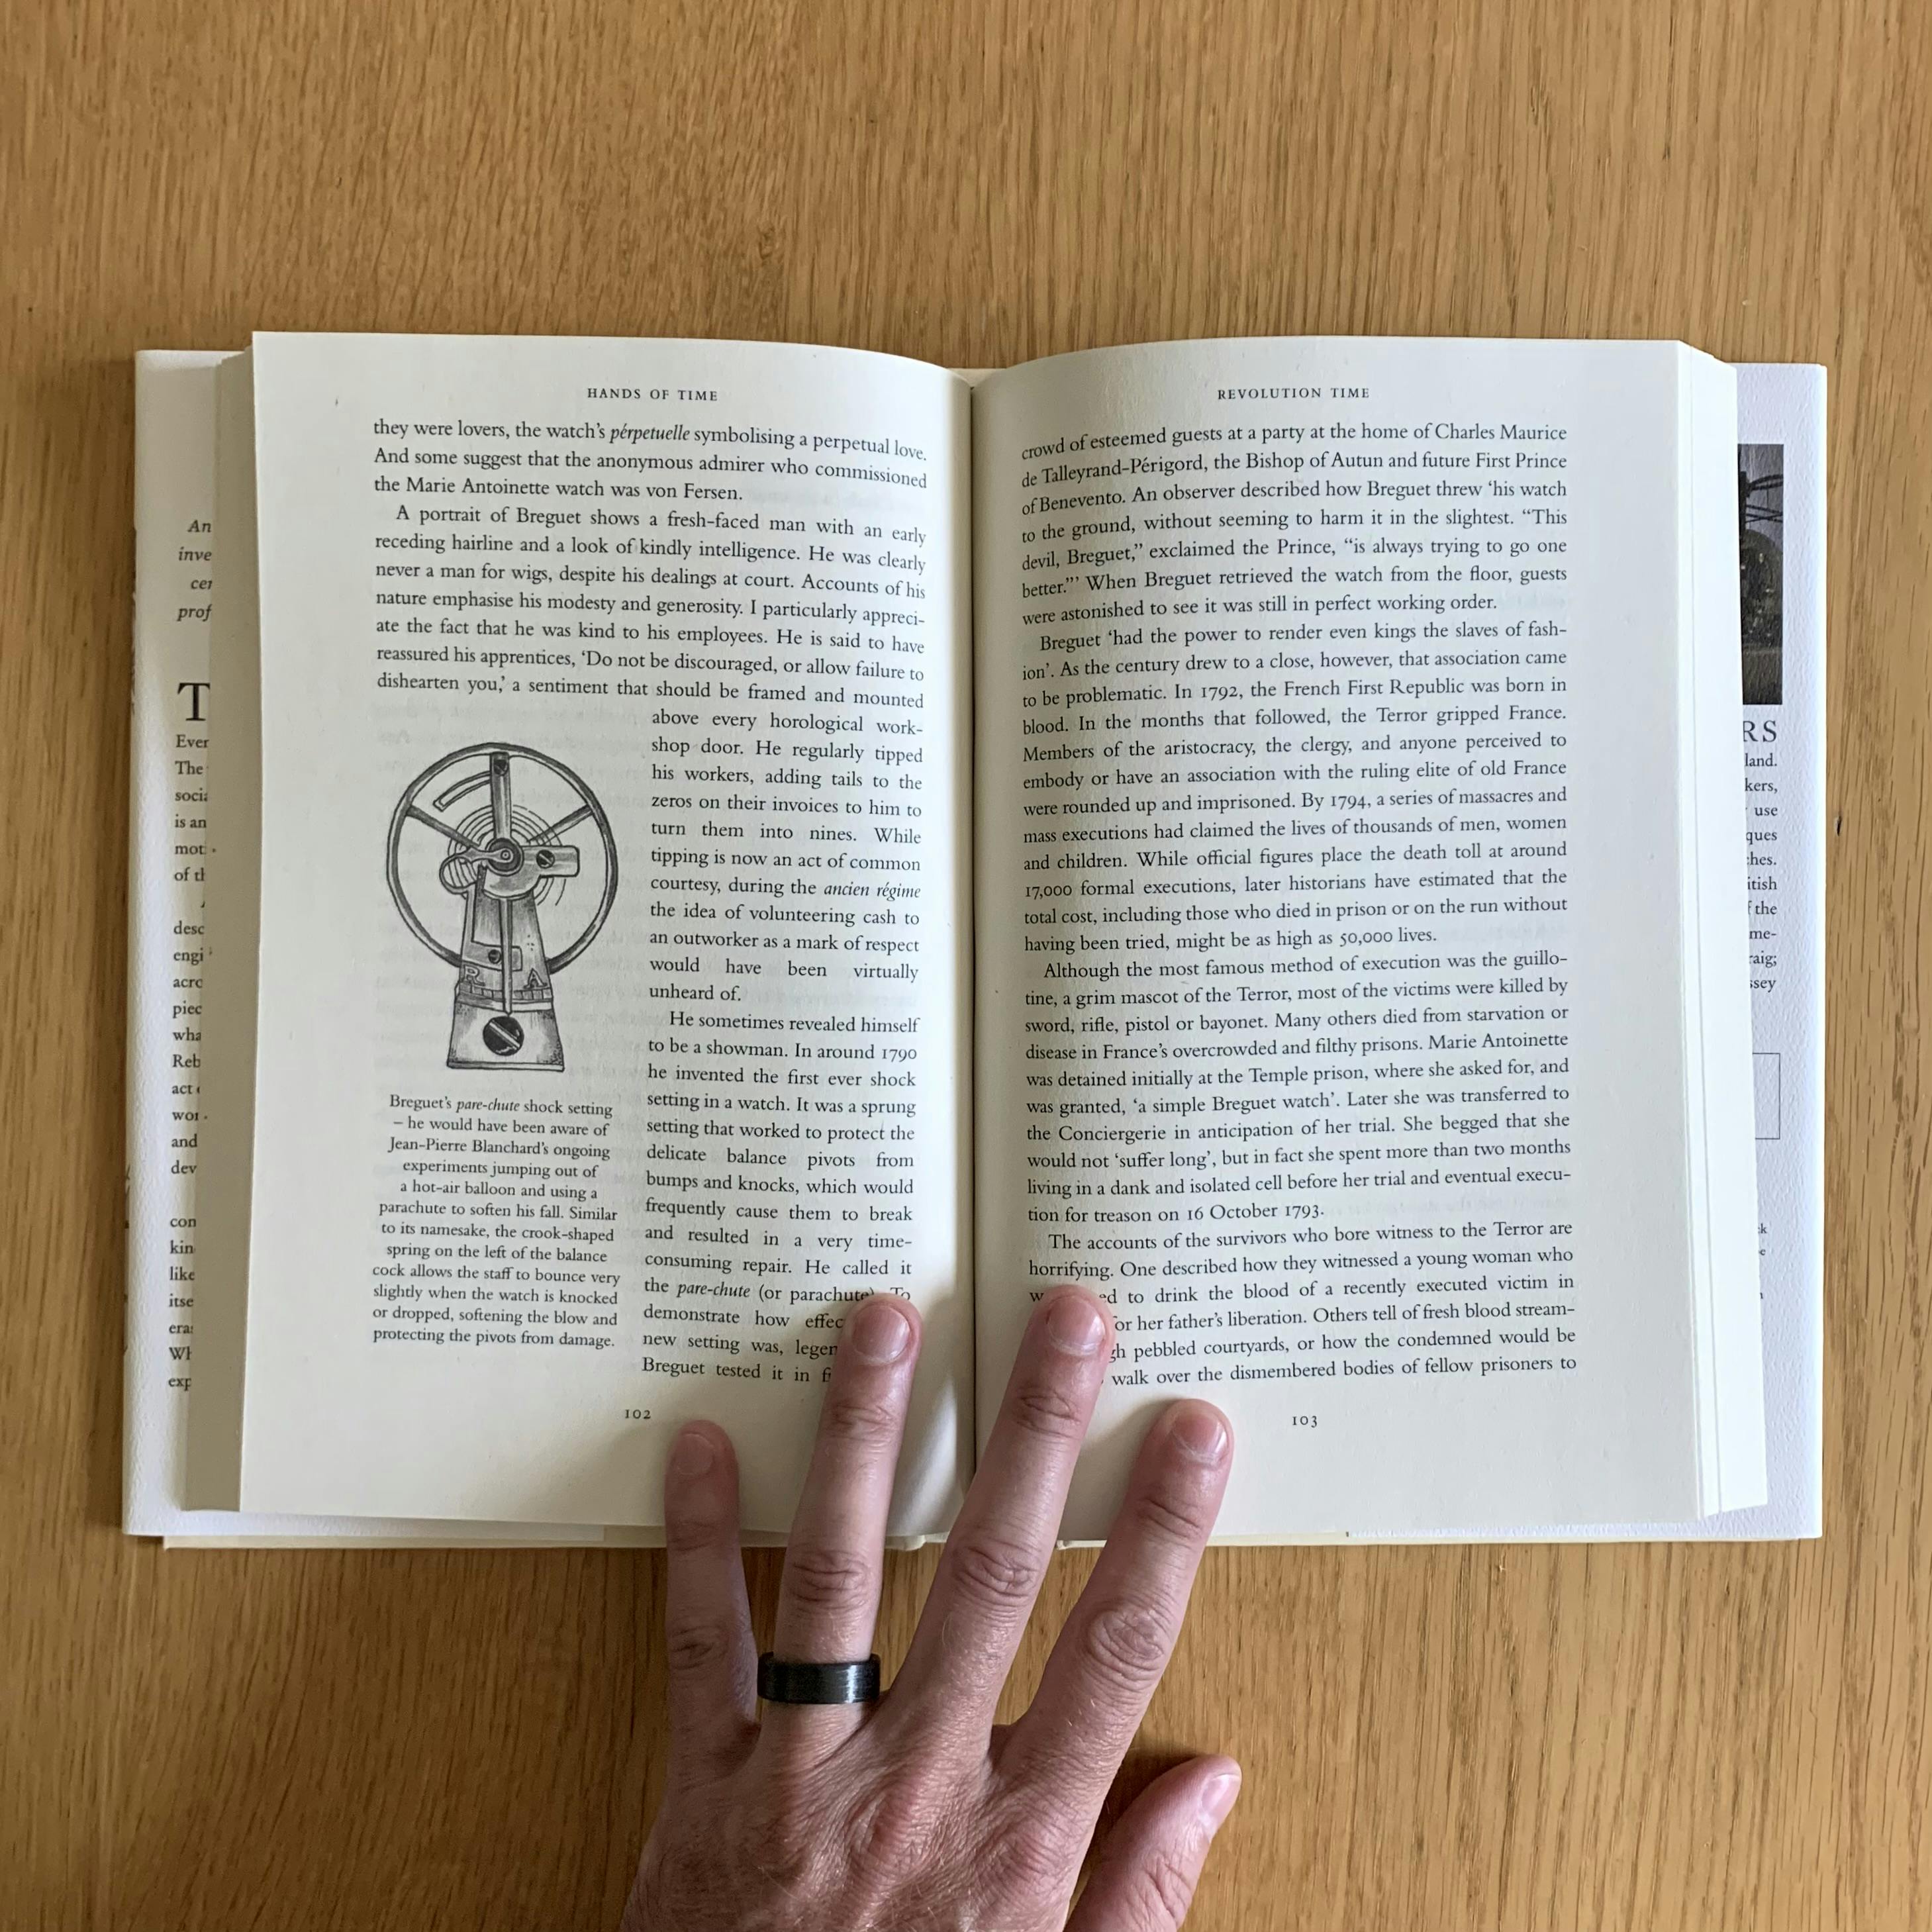 An inside spread of my copy of Rebecca Struthers’ Hands of Time. The books lays open on a wooden surface. An illustration of Breguet’s shock-protected balance cock, by Craig Struthers, is visible on the left-hand page.